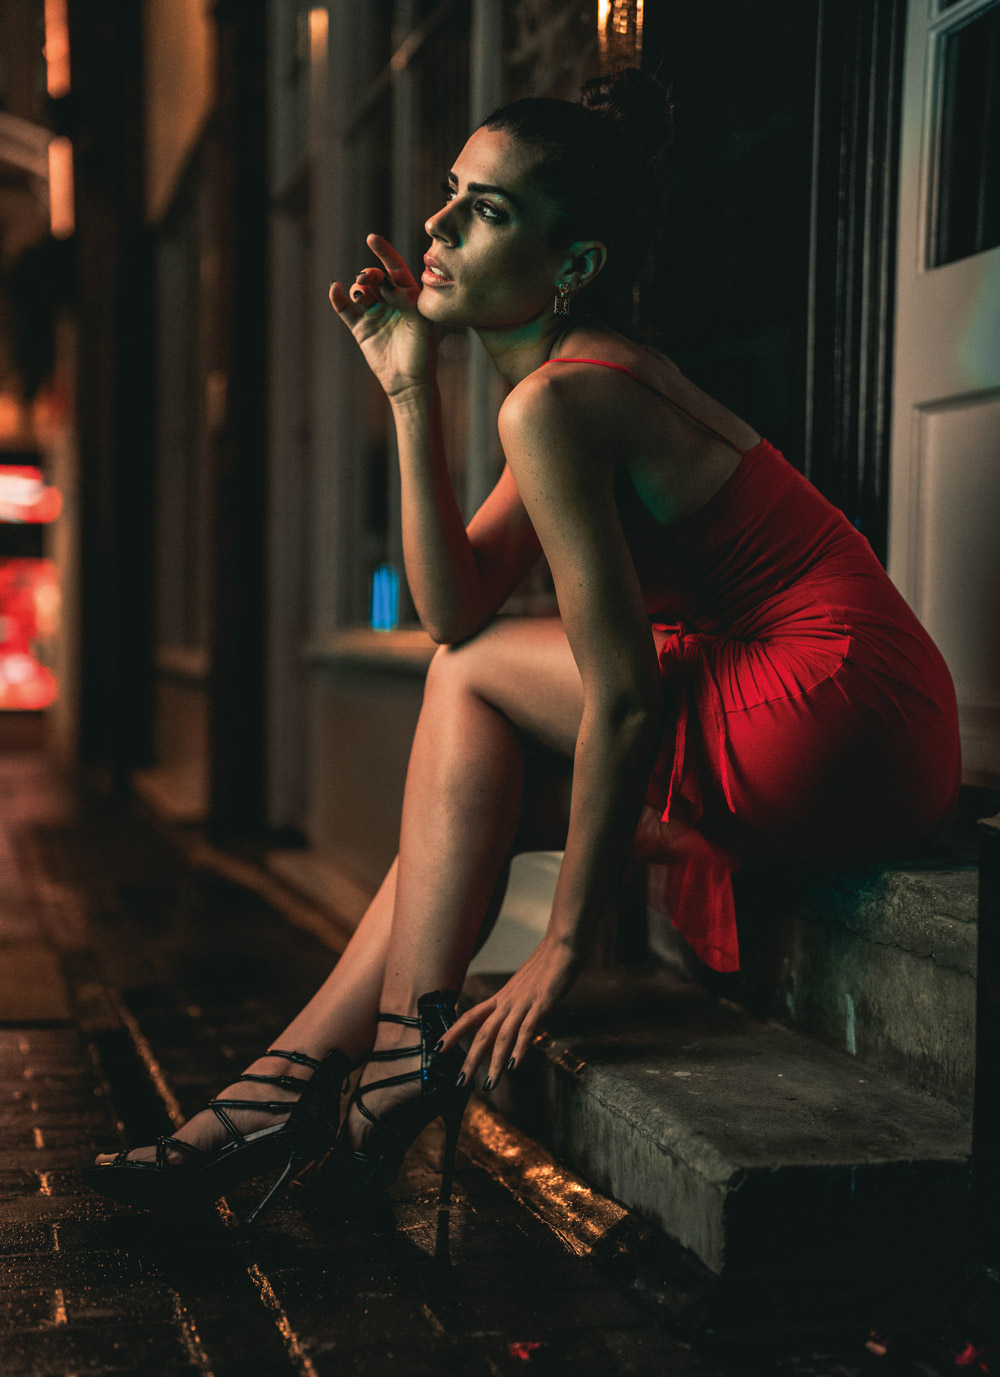 Sam Nash - The main light was a Rotolight AEOS 2 plus a NEO 3 for the turquoise accent lighting. Location: Soho, London. Model: @alba.sanchezx, Sony Alpha 1, 50mm G Master